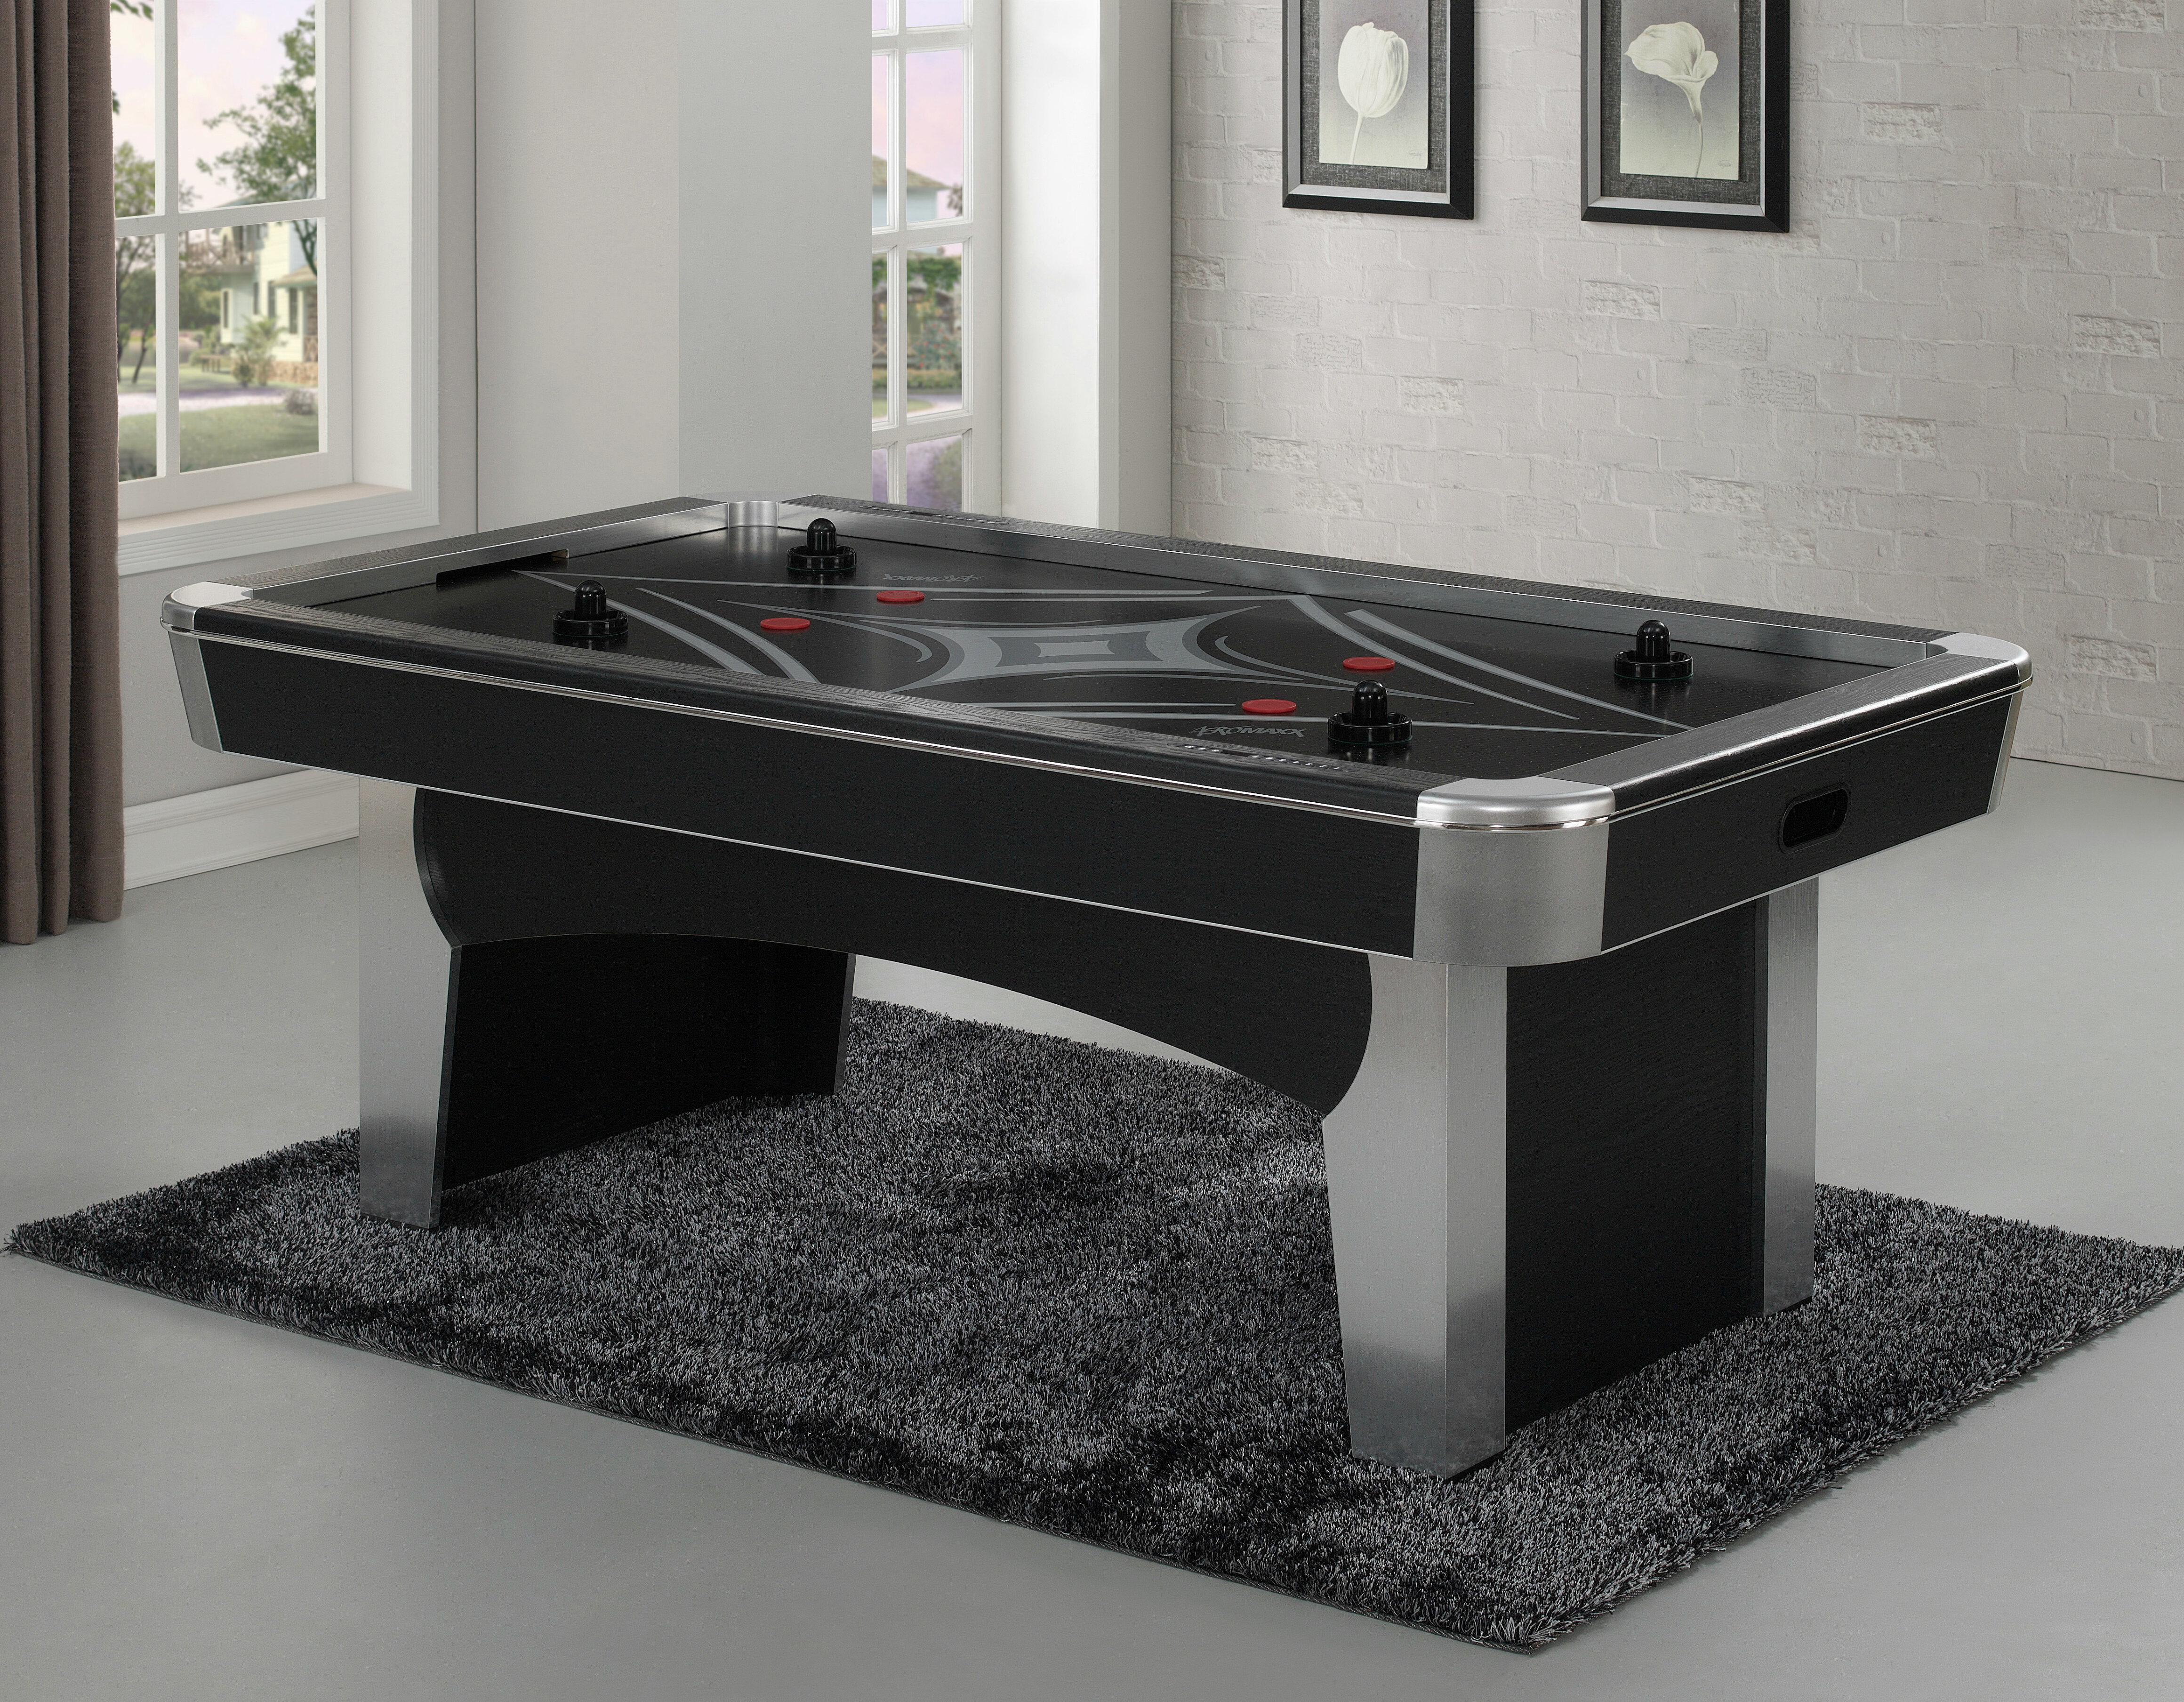 American Heritage Phoenix 84 Air Hockey Table With Manual